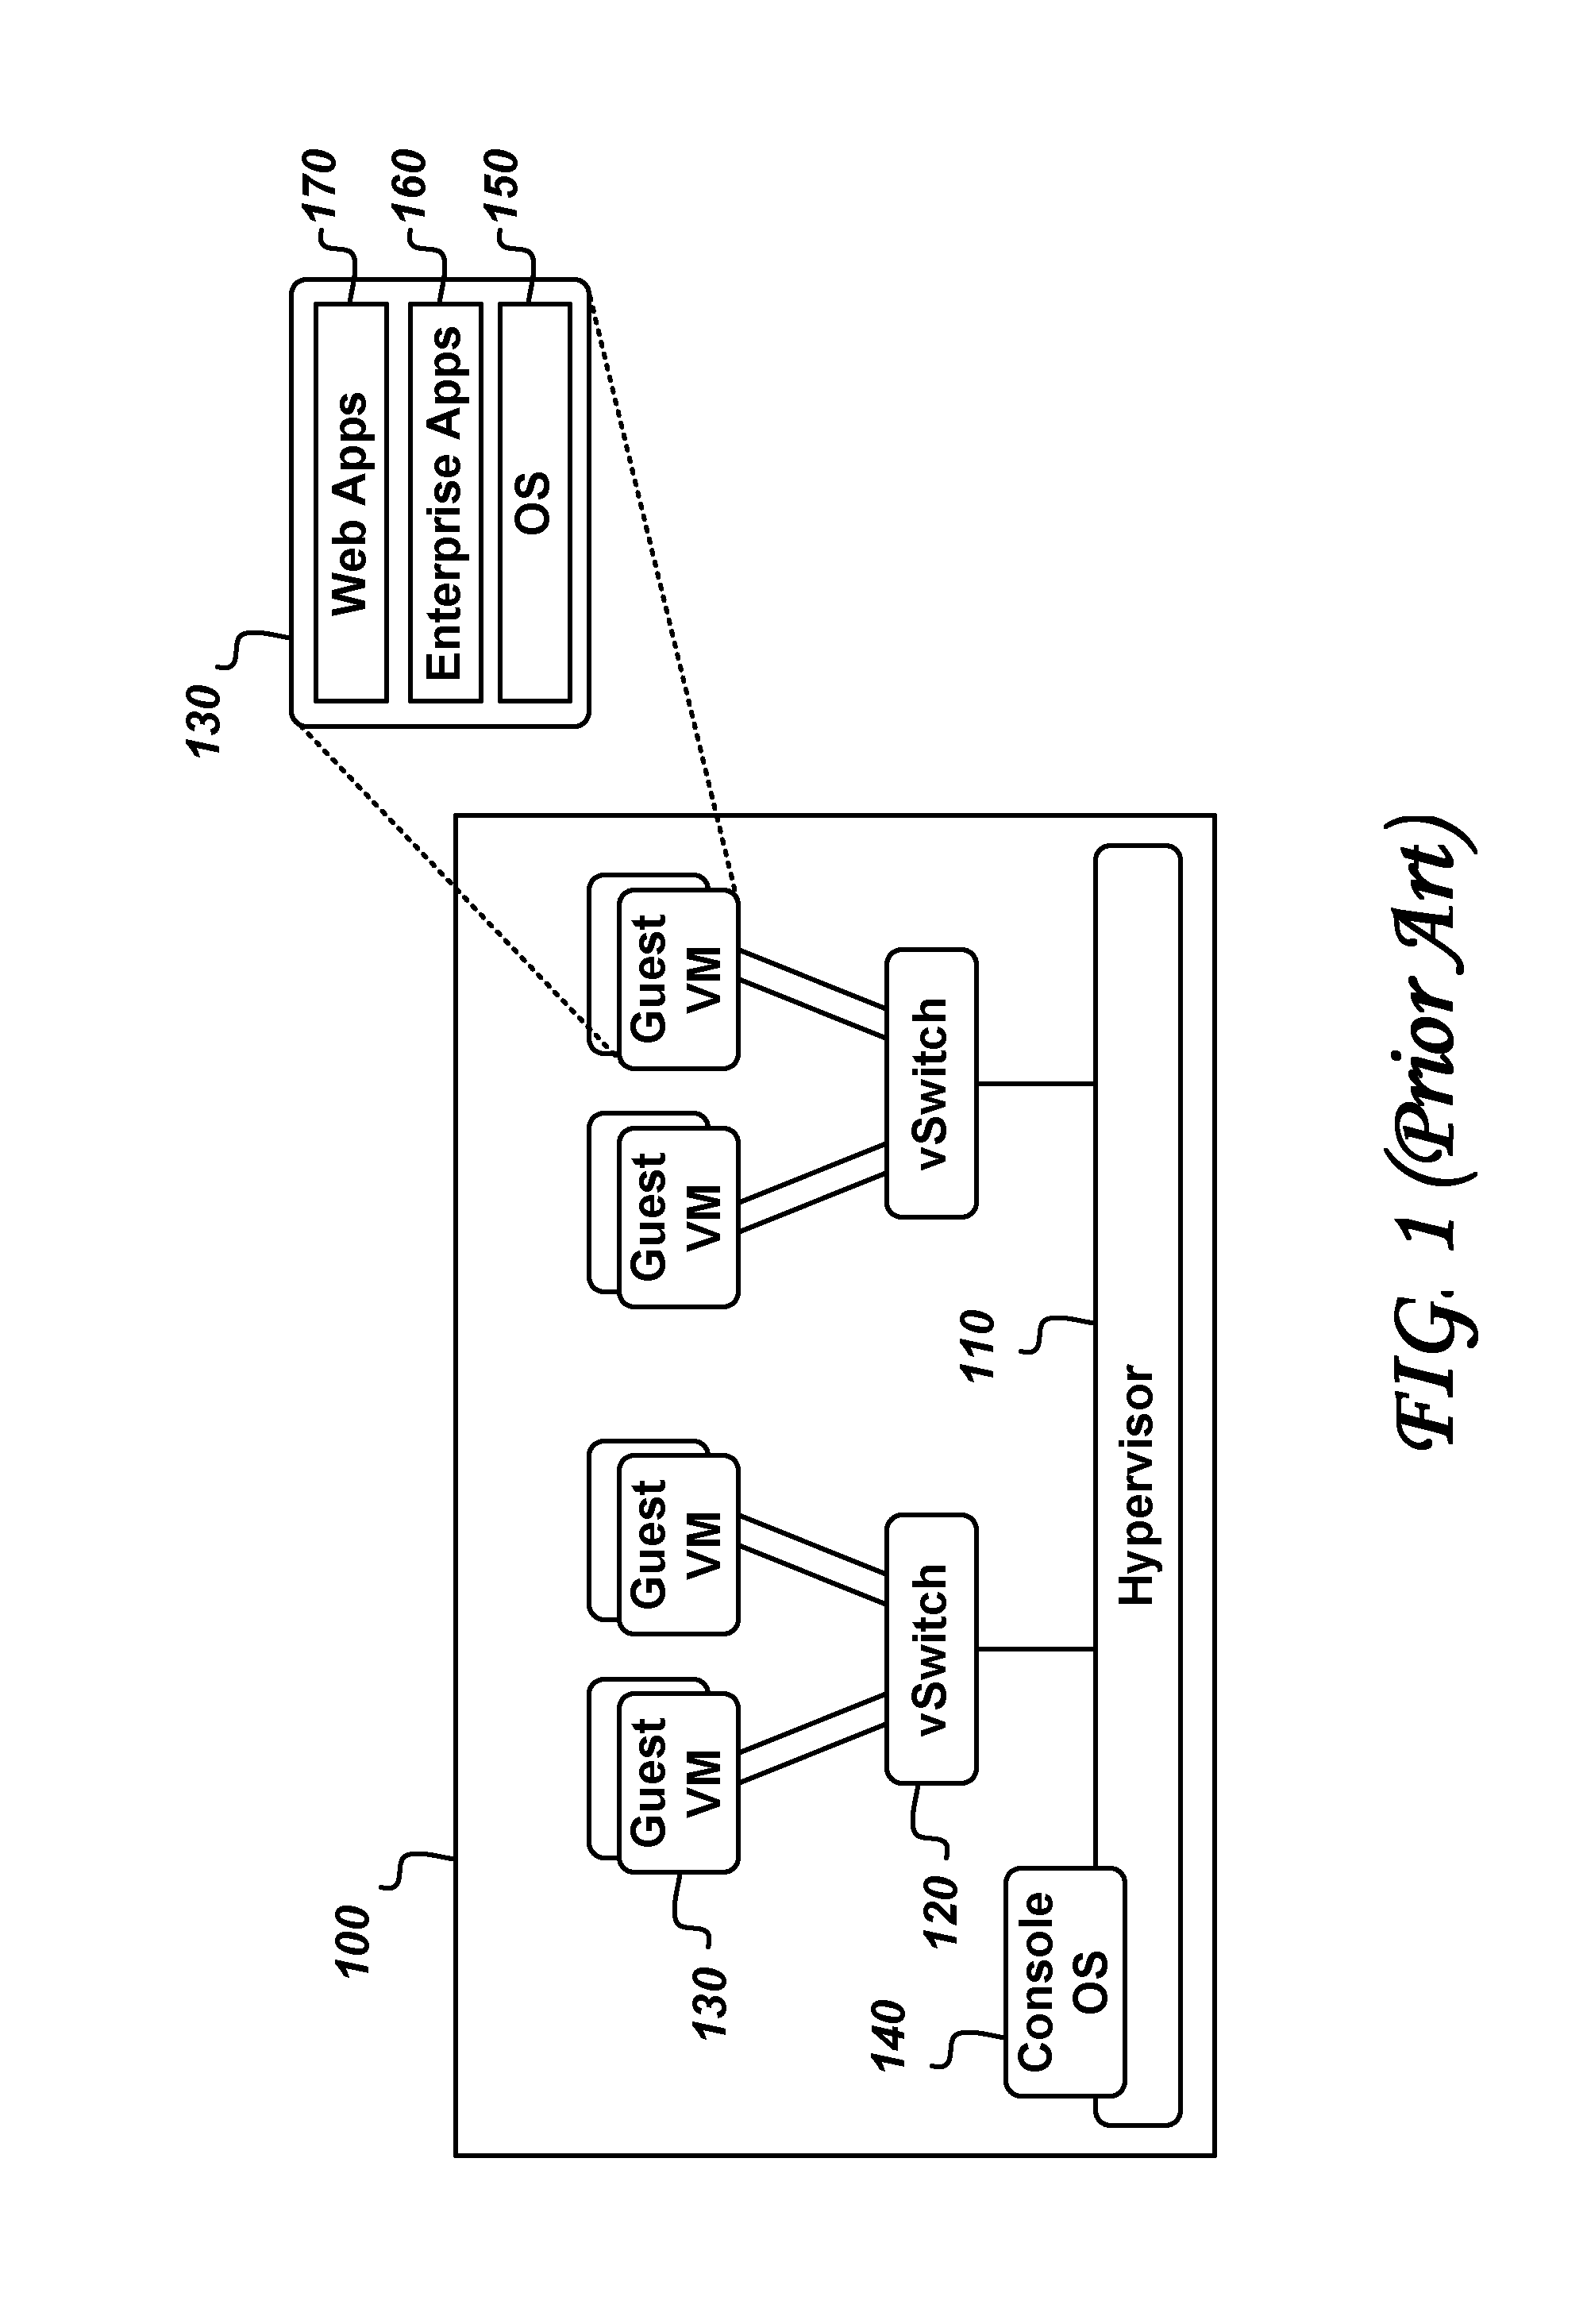 System and method for intelligent coordination of host and guest intrusion prevention in virtualized environment